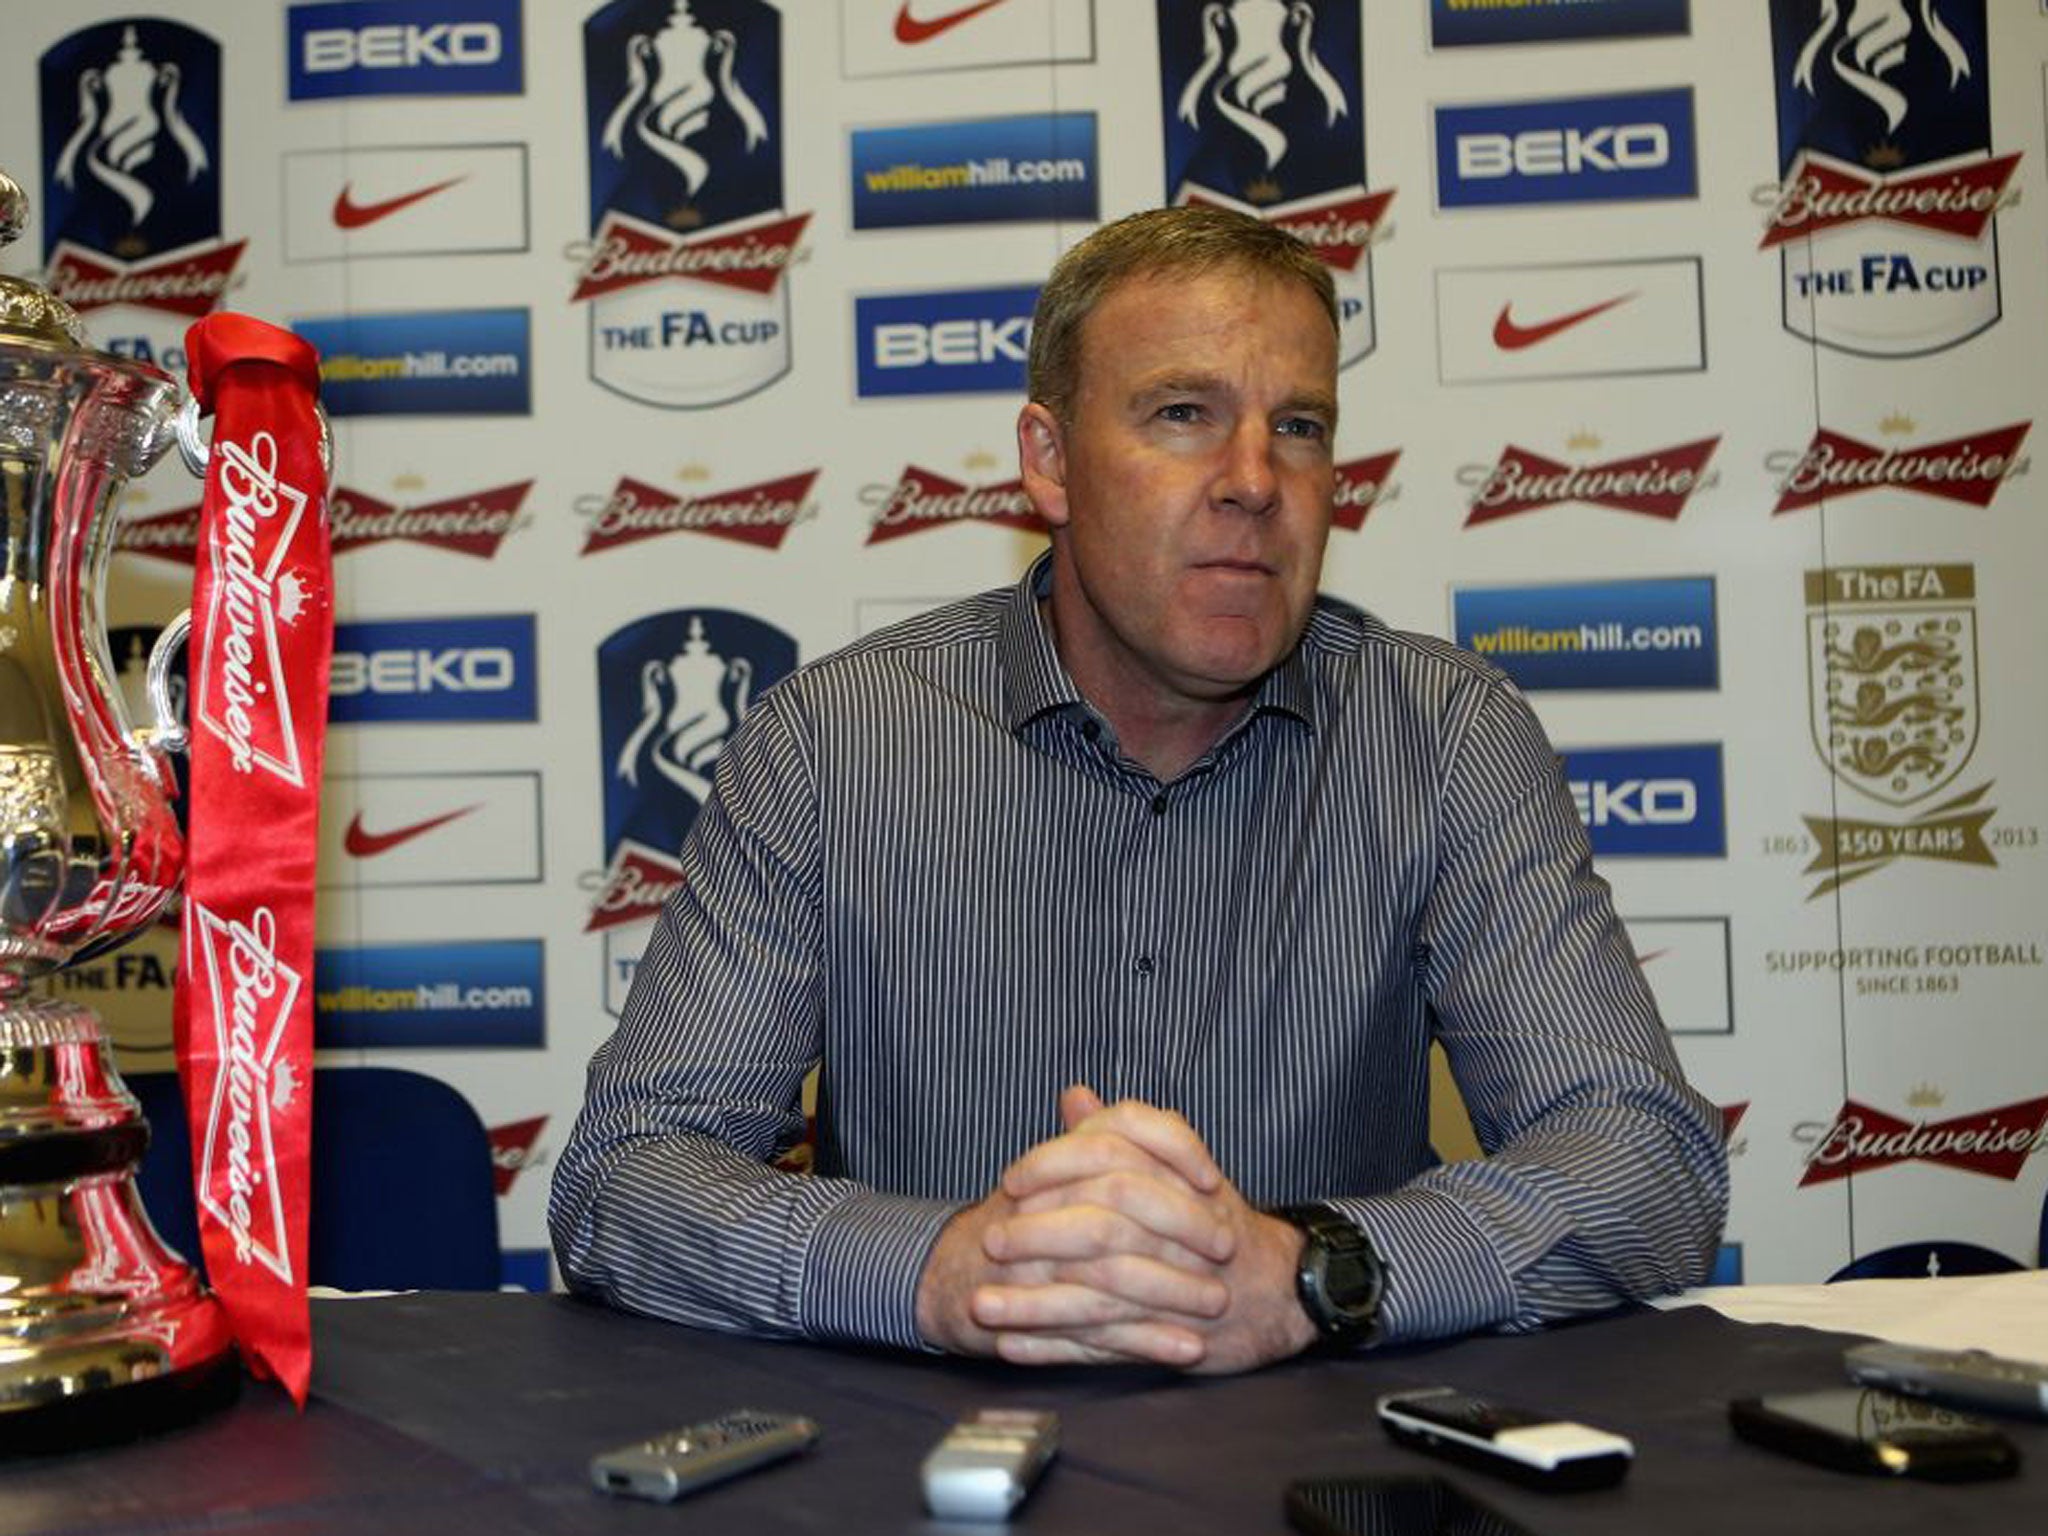 Kenny Jackett knows the pain of FA Cup defeat at Wembley